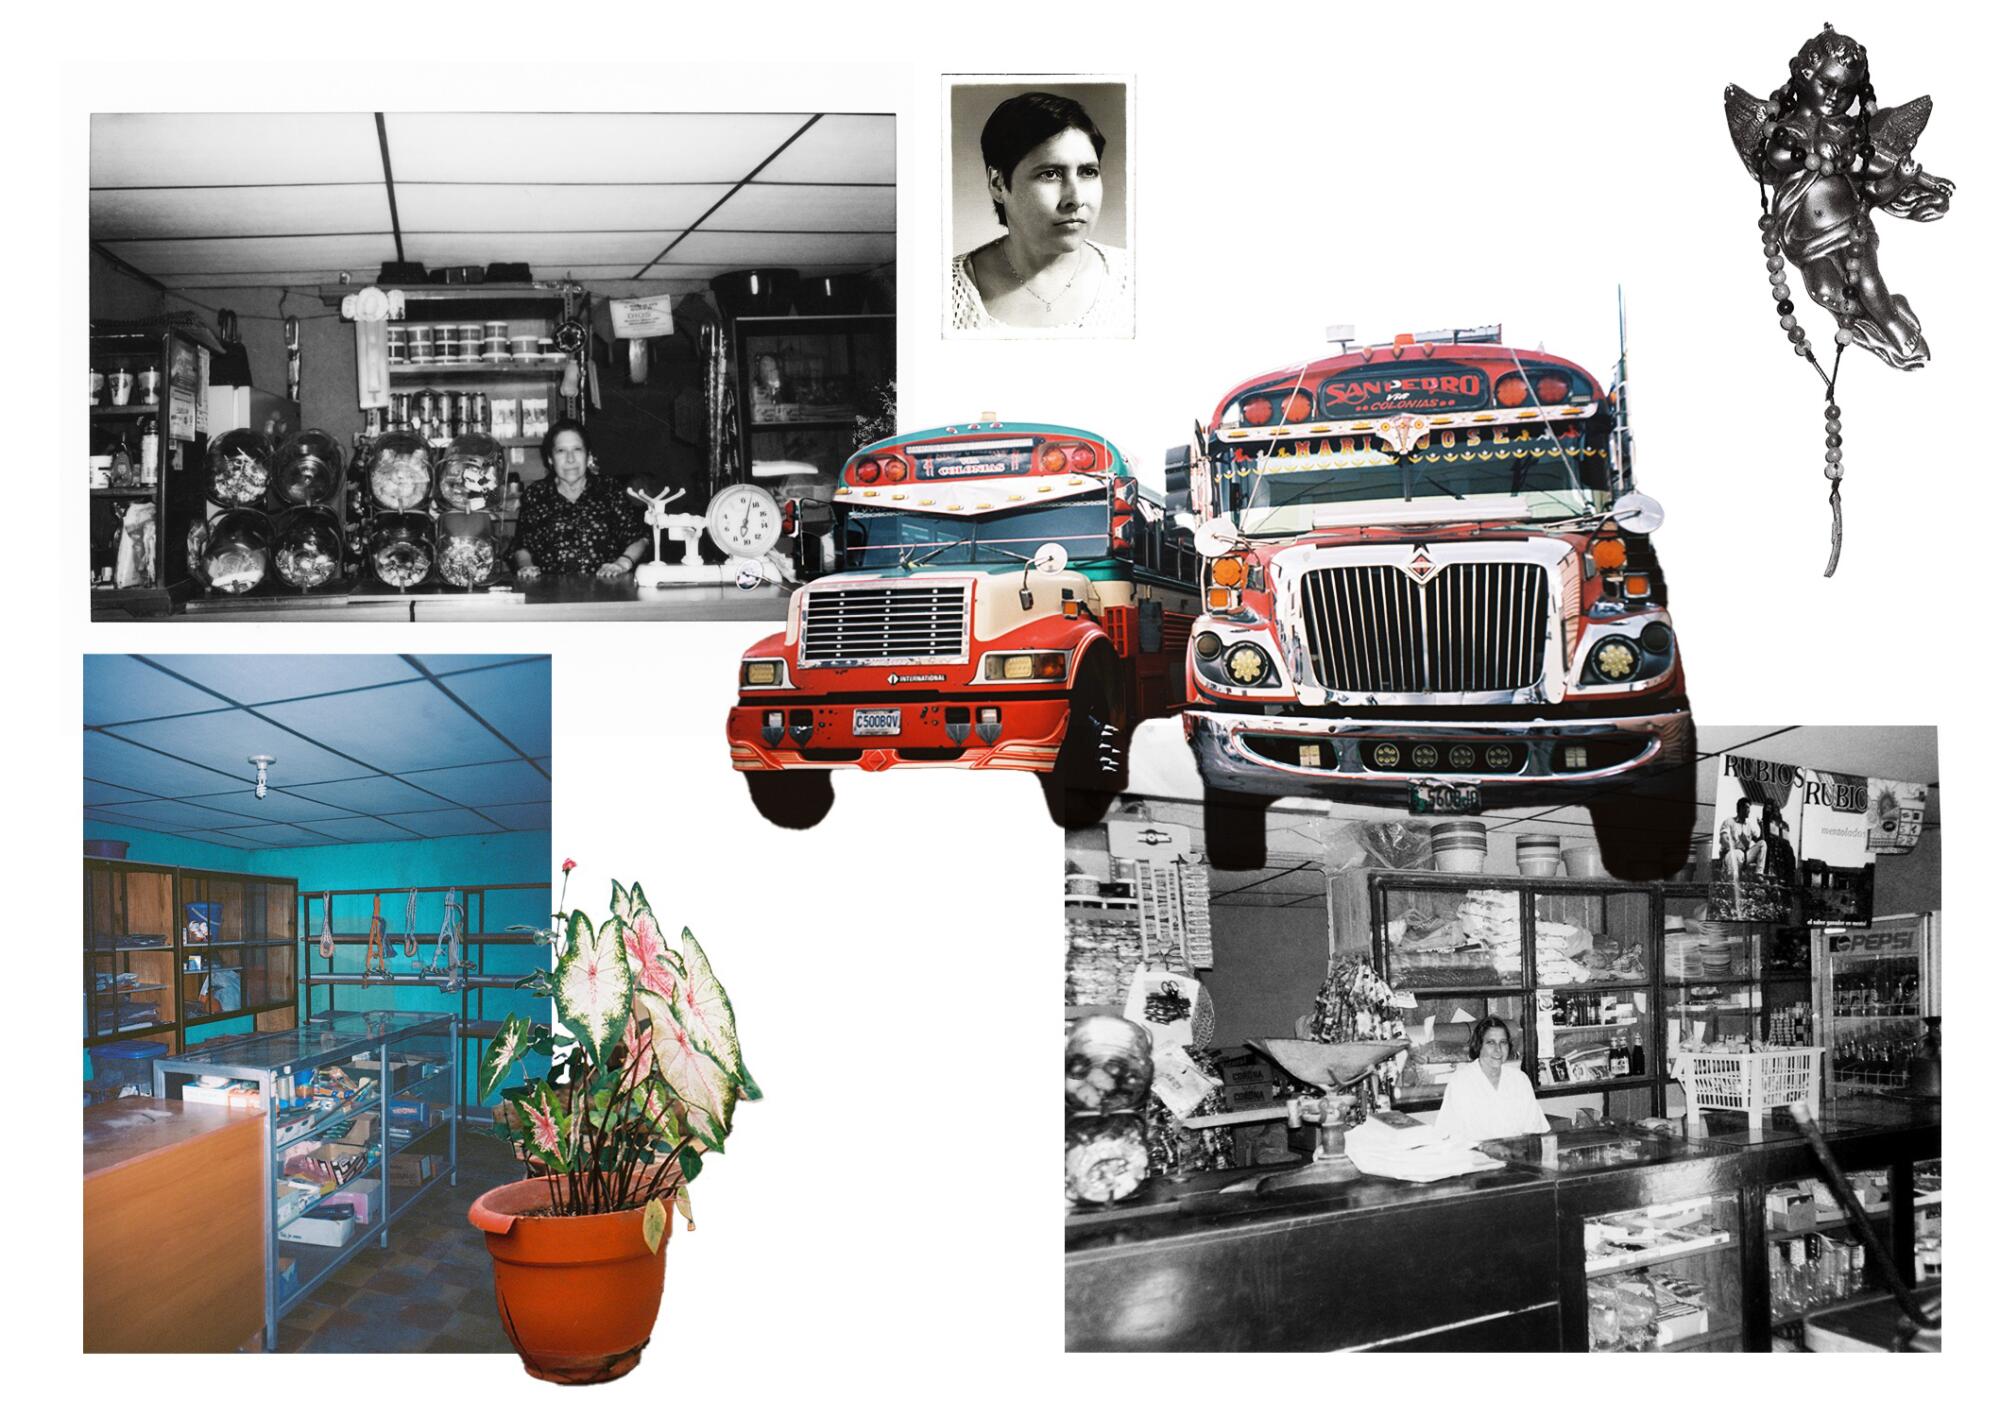 A photo collage featuring a vintage bus, headshots, a potted plant, the interior of a store, and more.